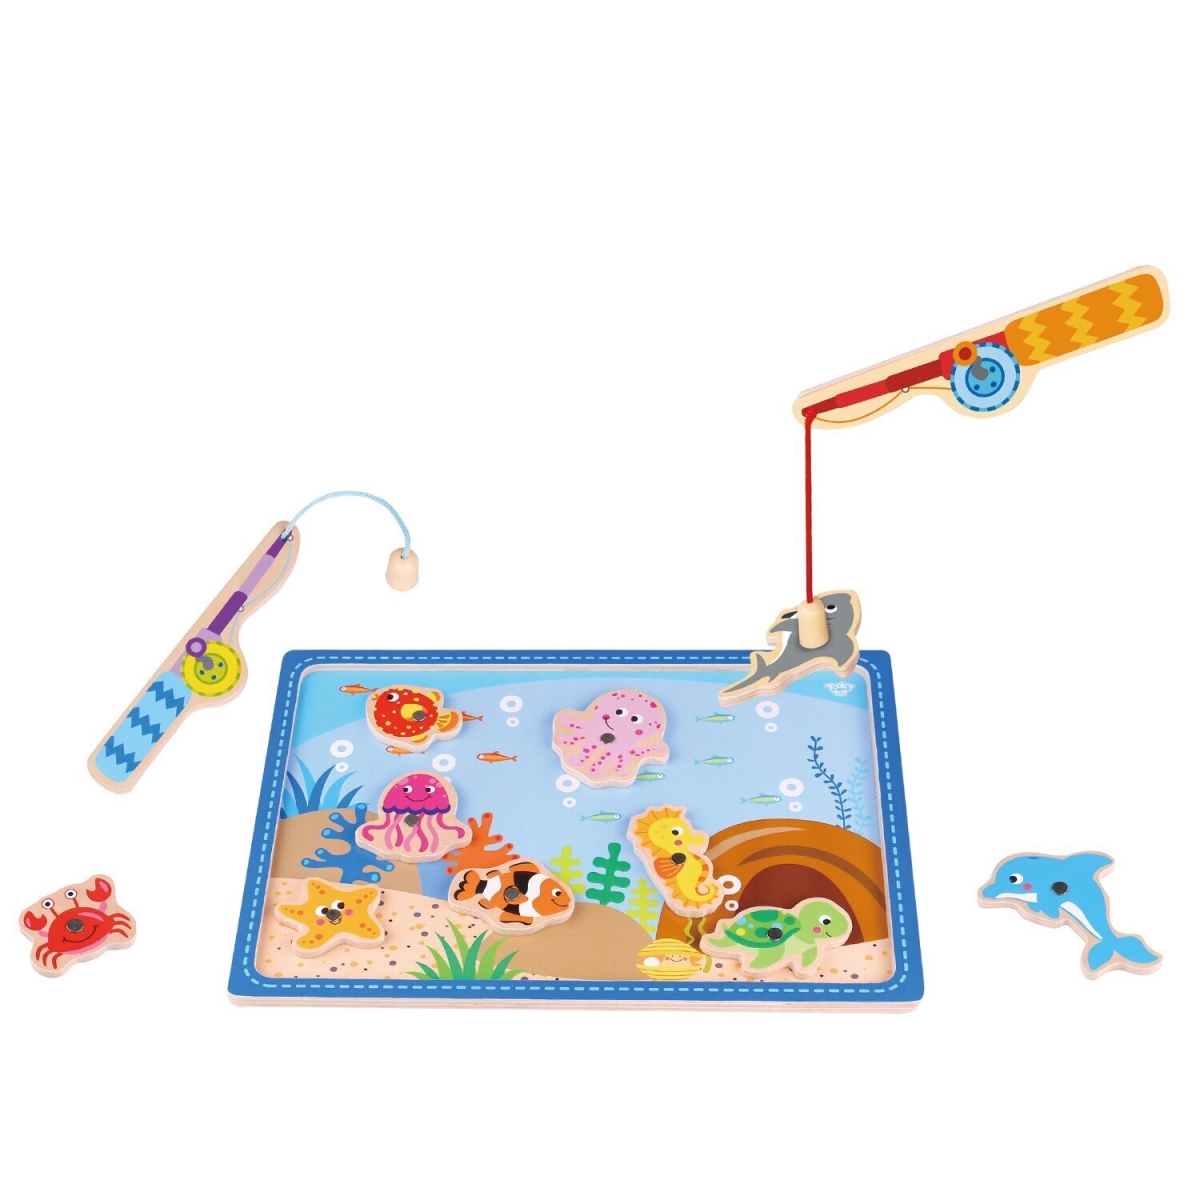 Picture of Tooky Toy 300273 30 x 22 x 1 cm Fishing Game